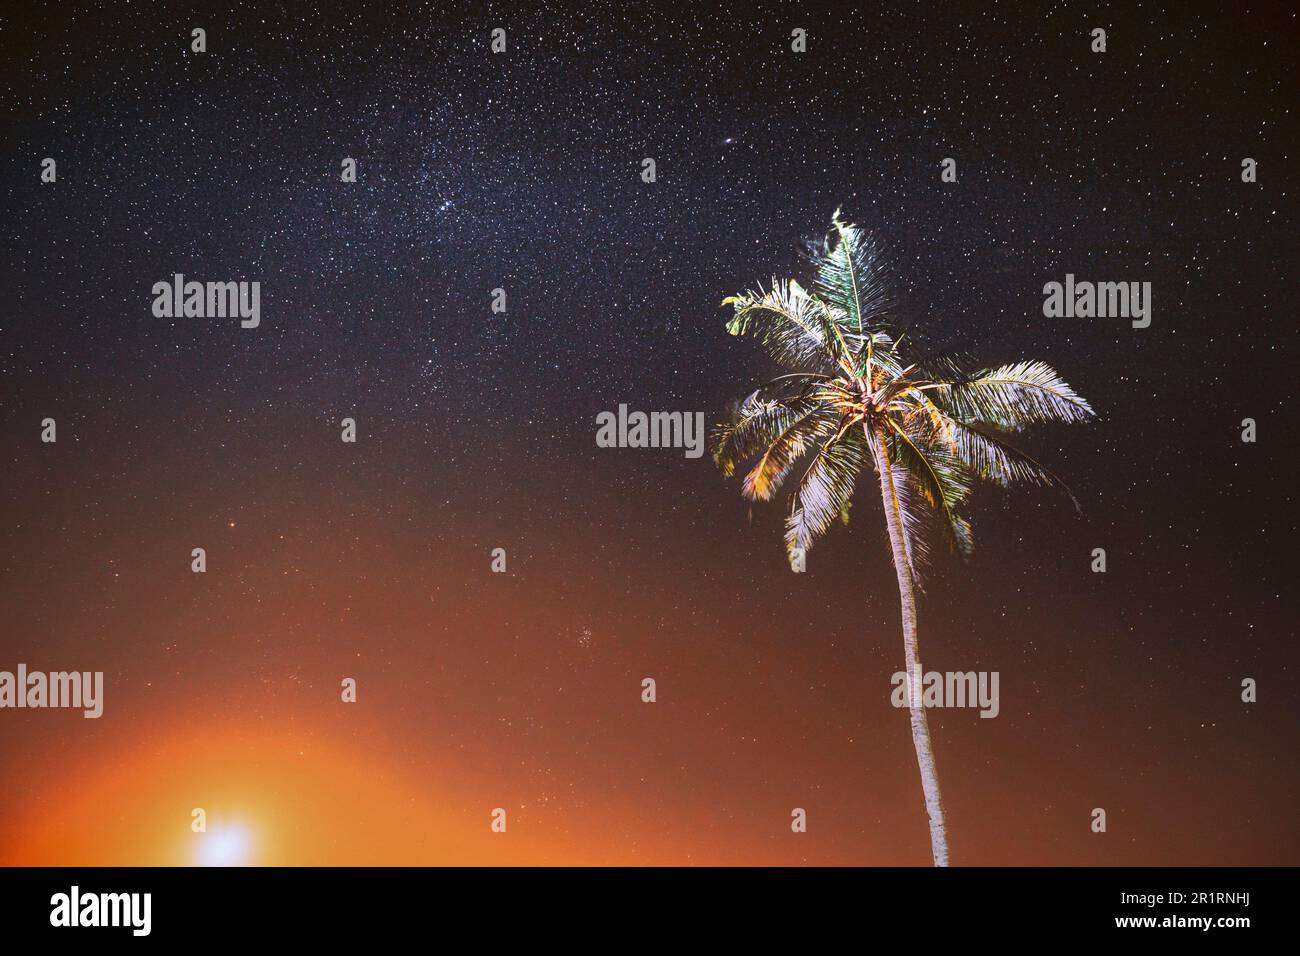 Night Starry Sky Over Tropical Beach With Lonely Palm Tree. Amazing Stars Effect Sky. Soft Colors. Beach Tropical Palm. Voyage Concept. Stock Photo